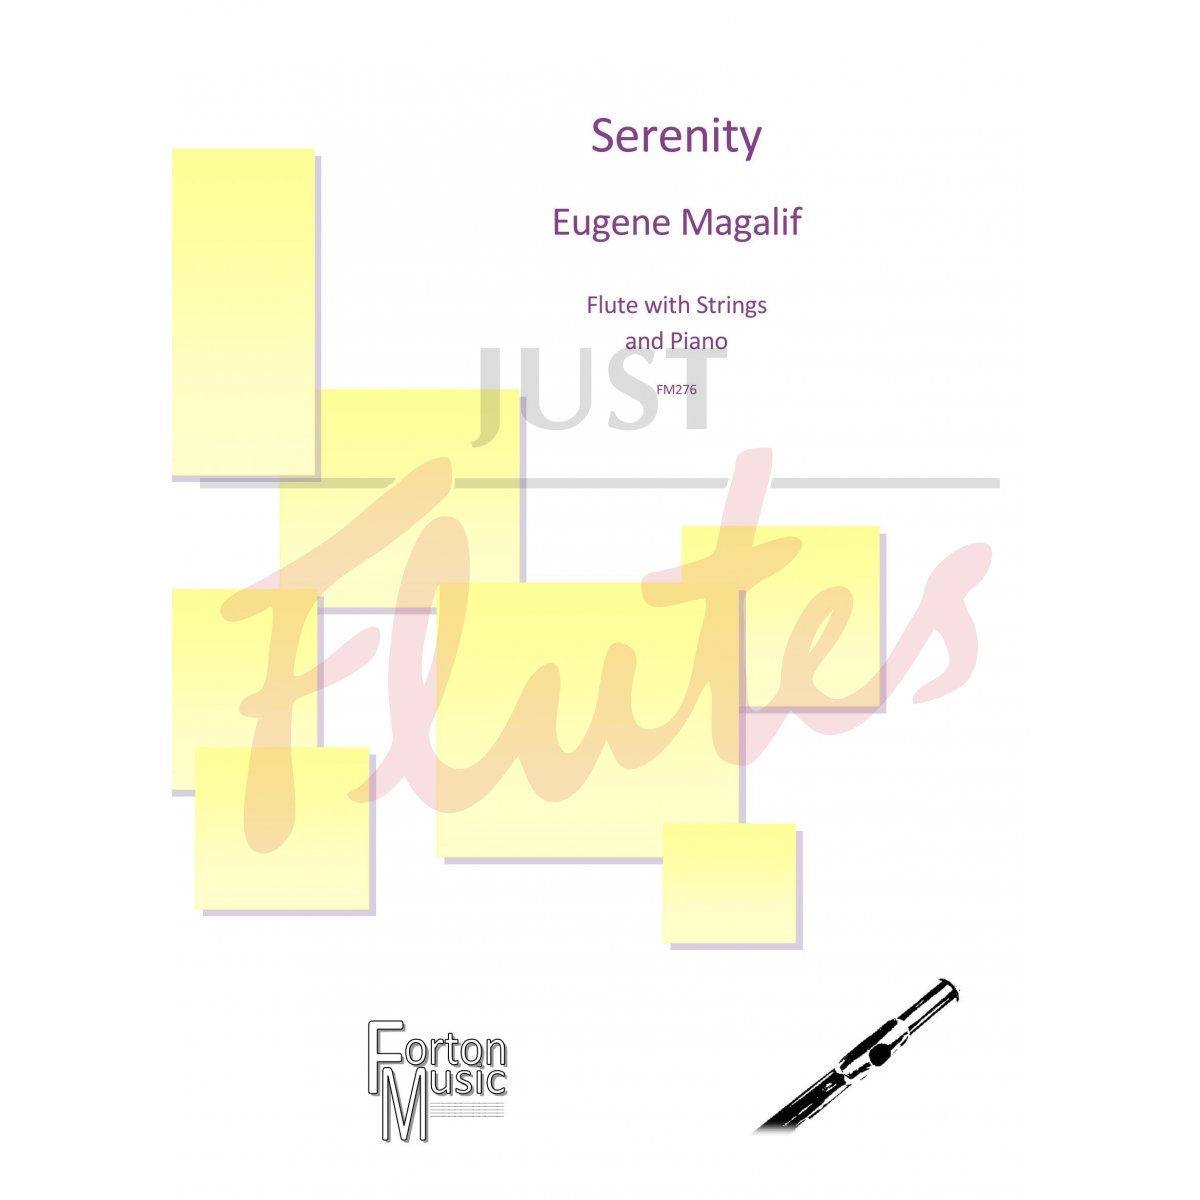 Serenity for Flute with Strings and Piano